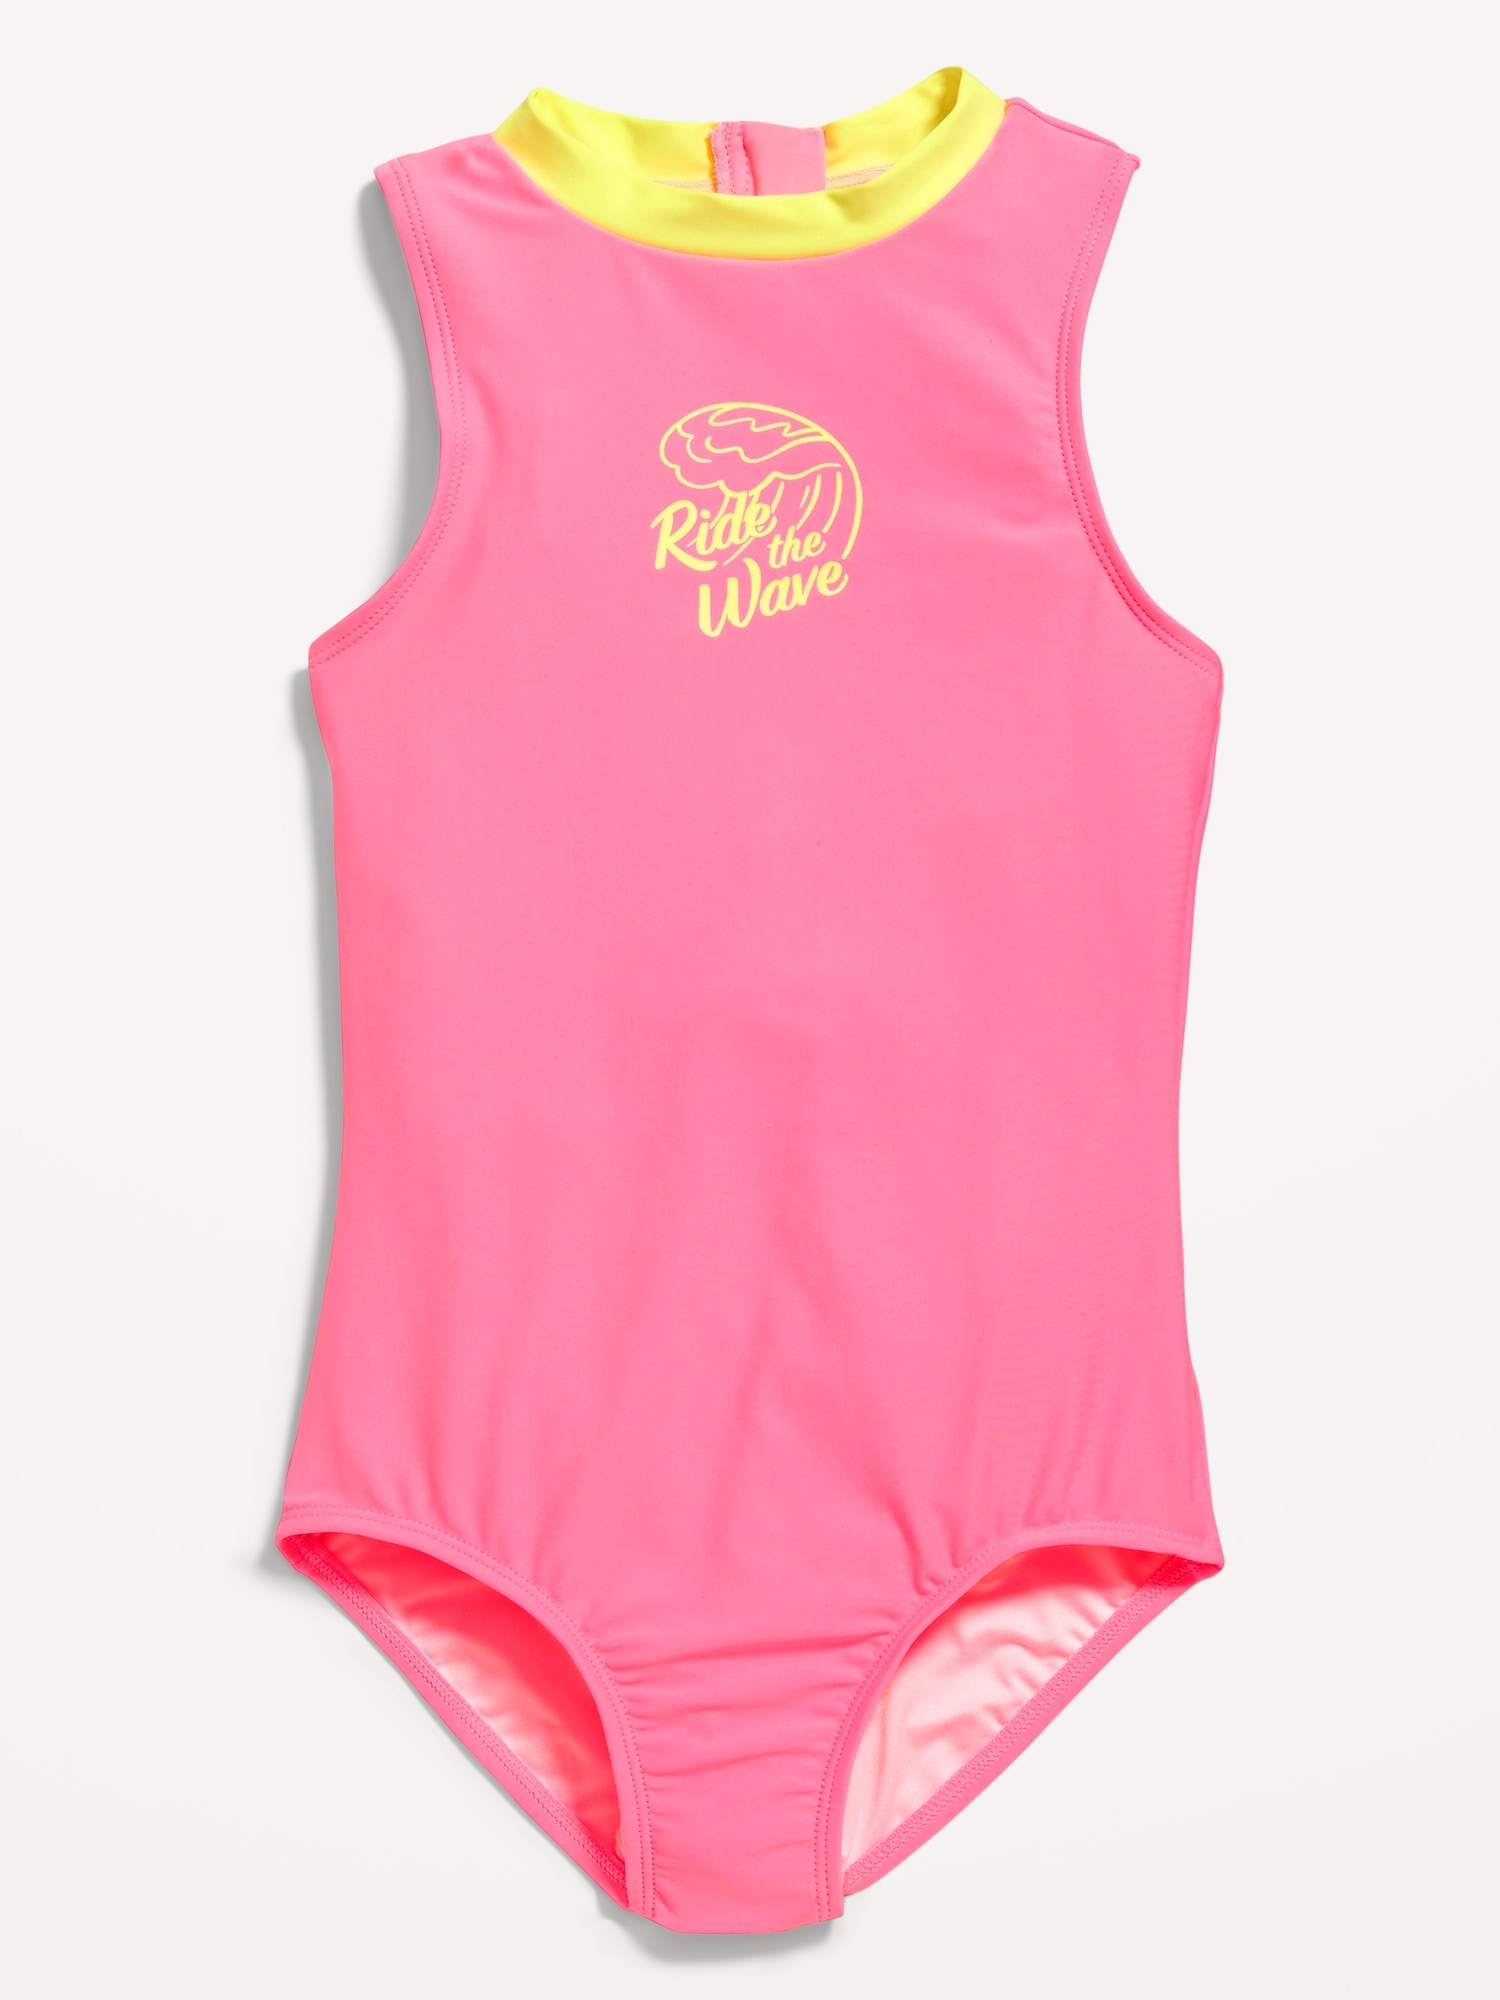 Old Navy High-Neck One-Piece Swimsuit for Girls pink. 1